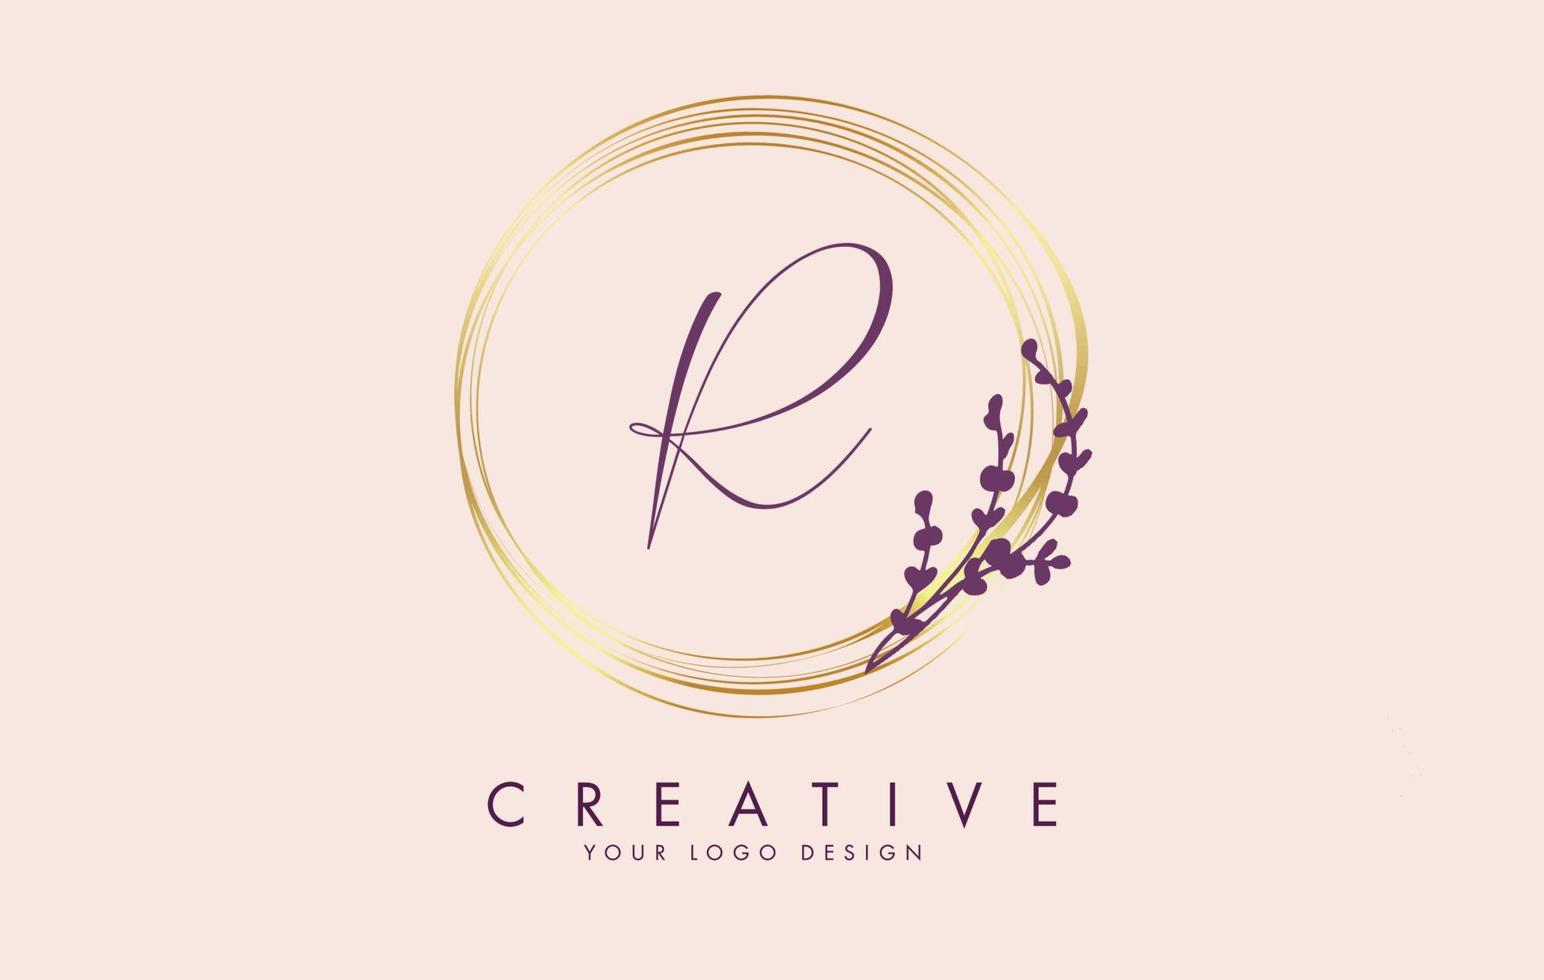 Handwritten R Letter logo design with golden circles and purple leaves on branches around. Vector Illustration with R letter.